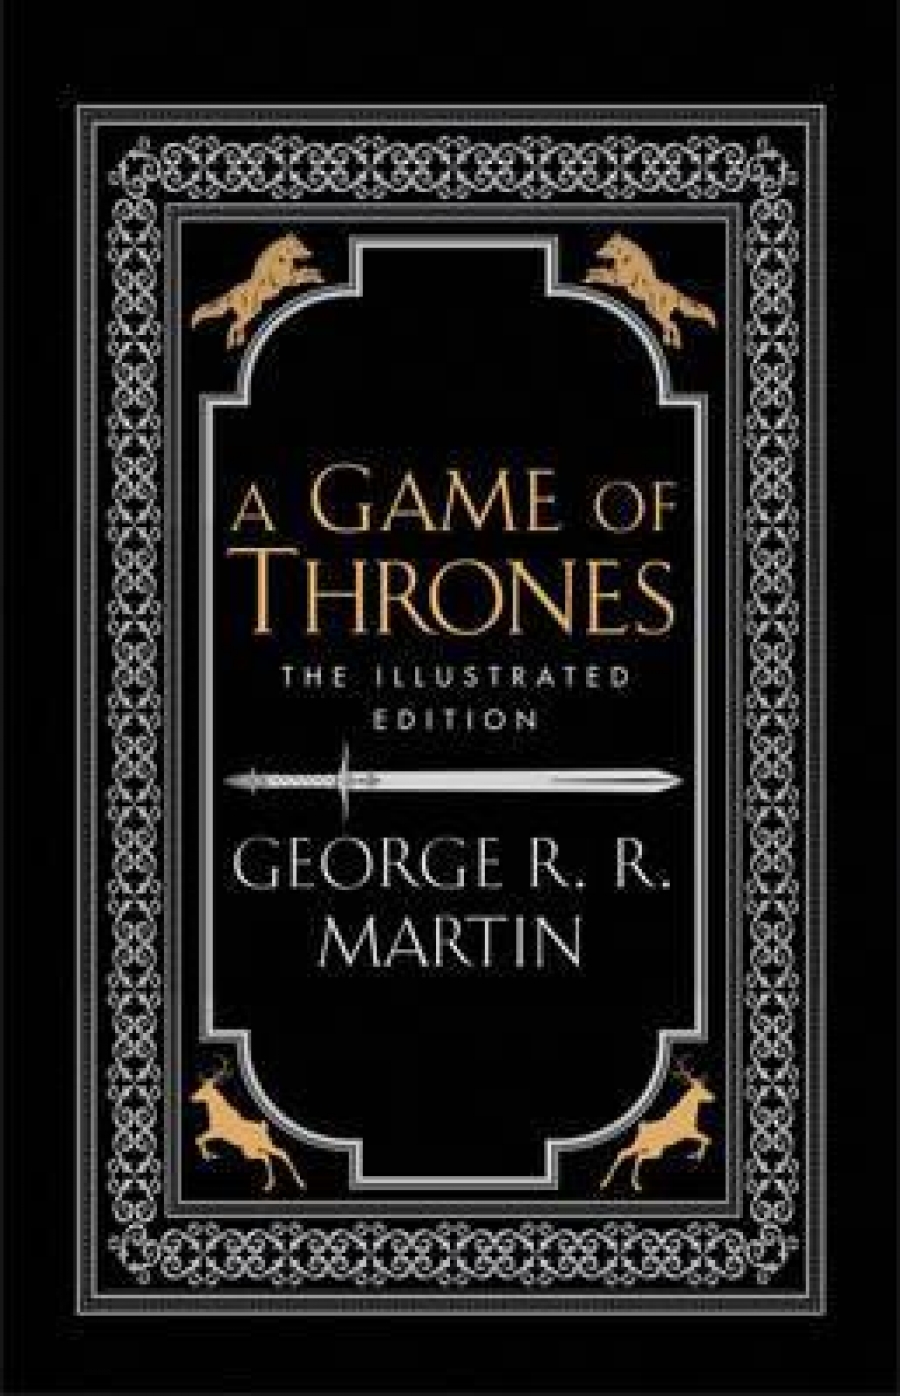 R R Martin George Game of Thrones 